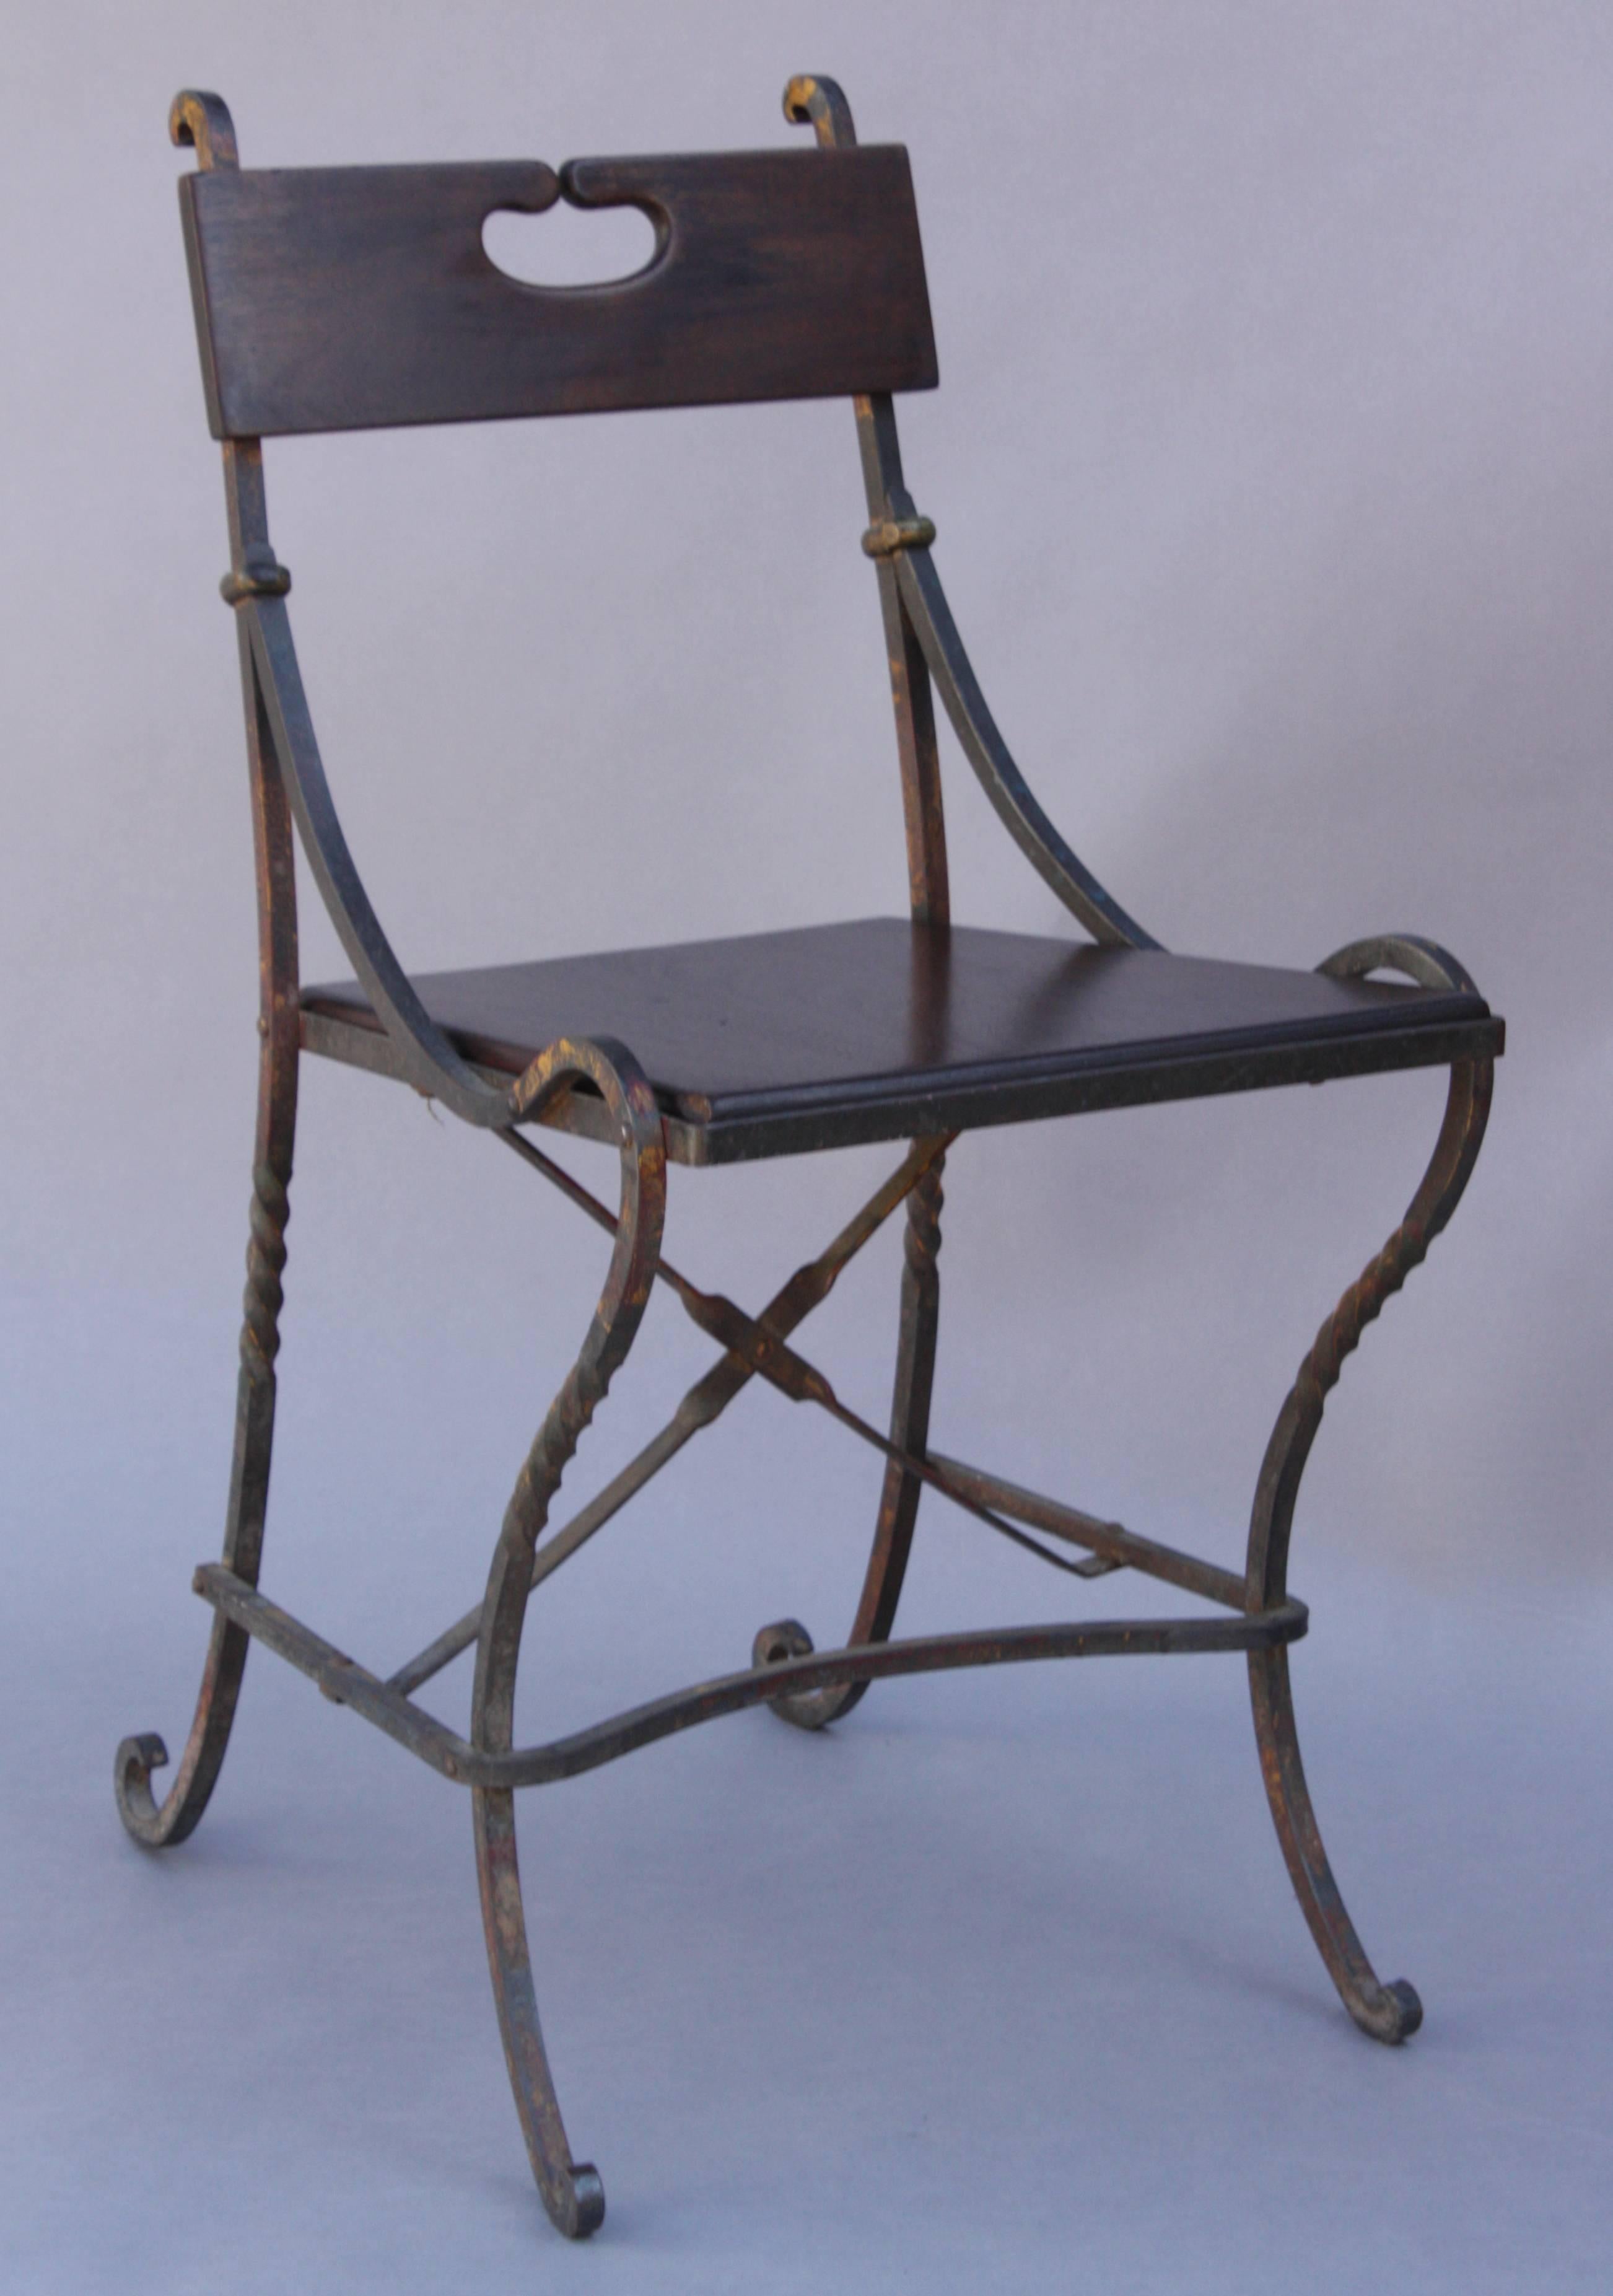 Small size side chair perfect for desk. Retains its original polychrome finish.